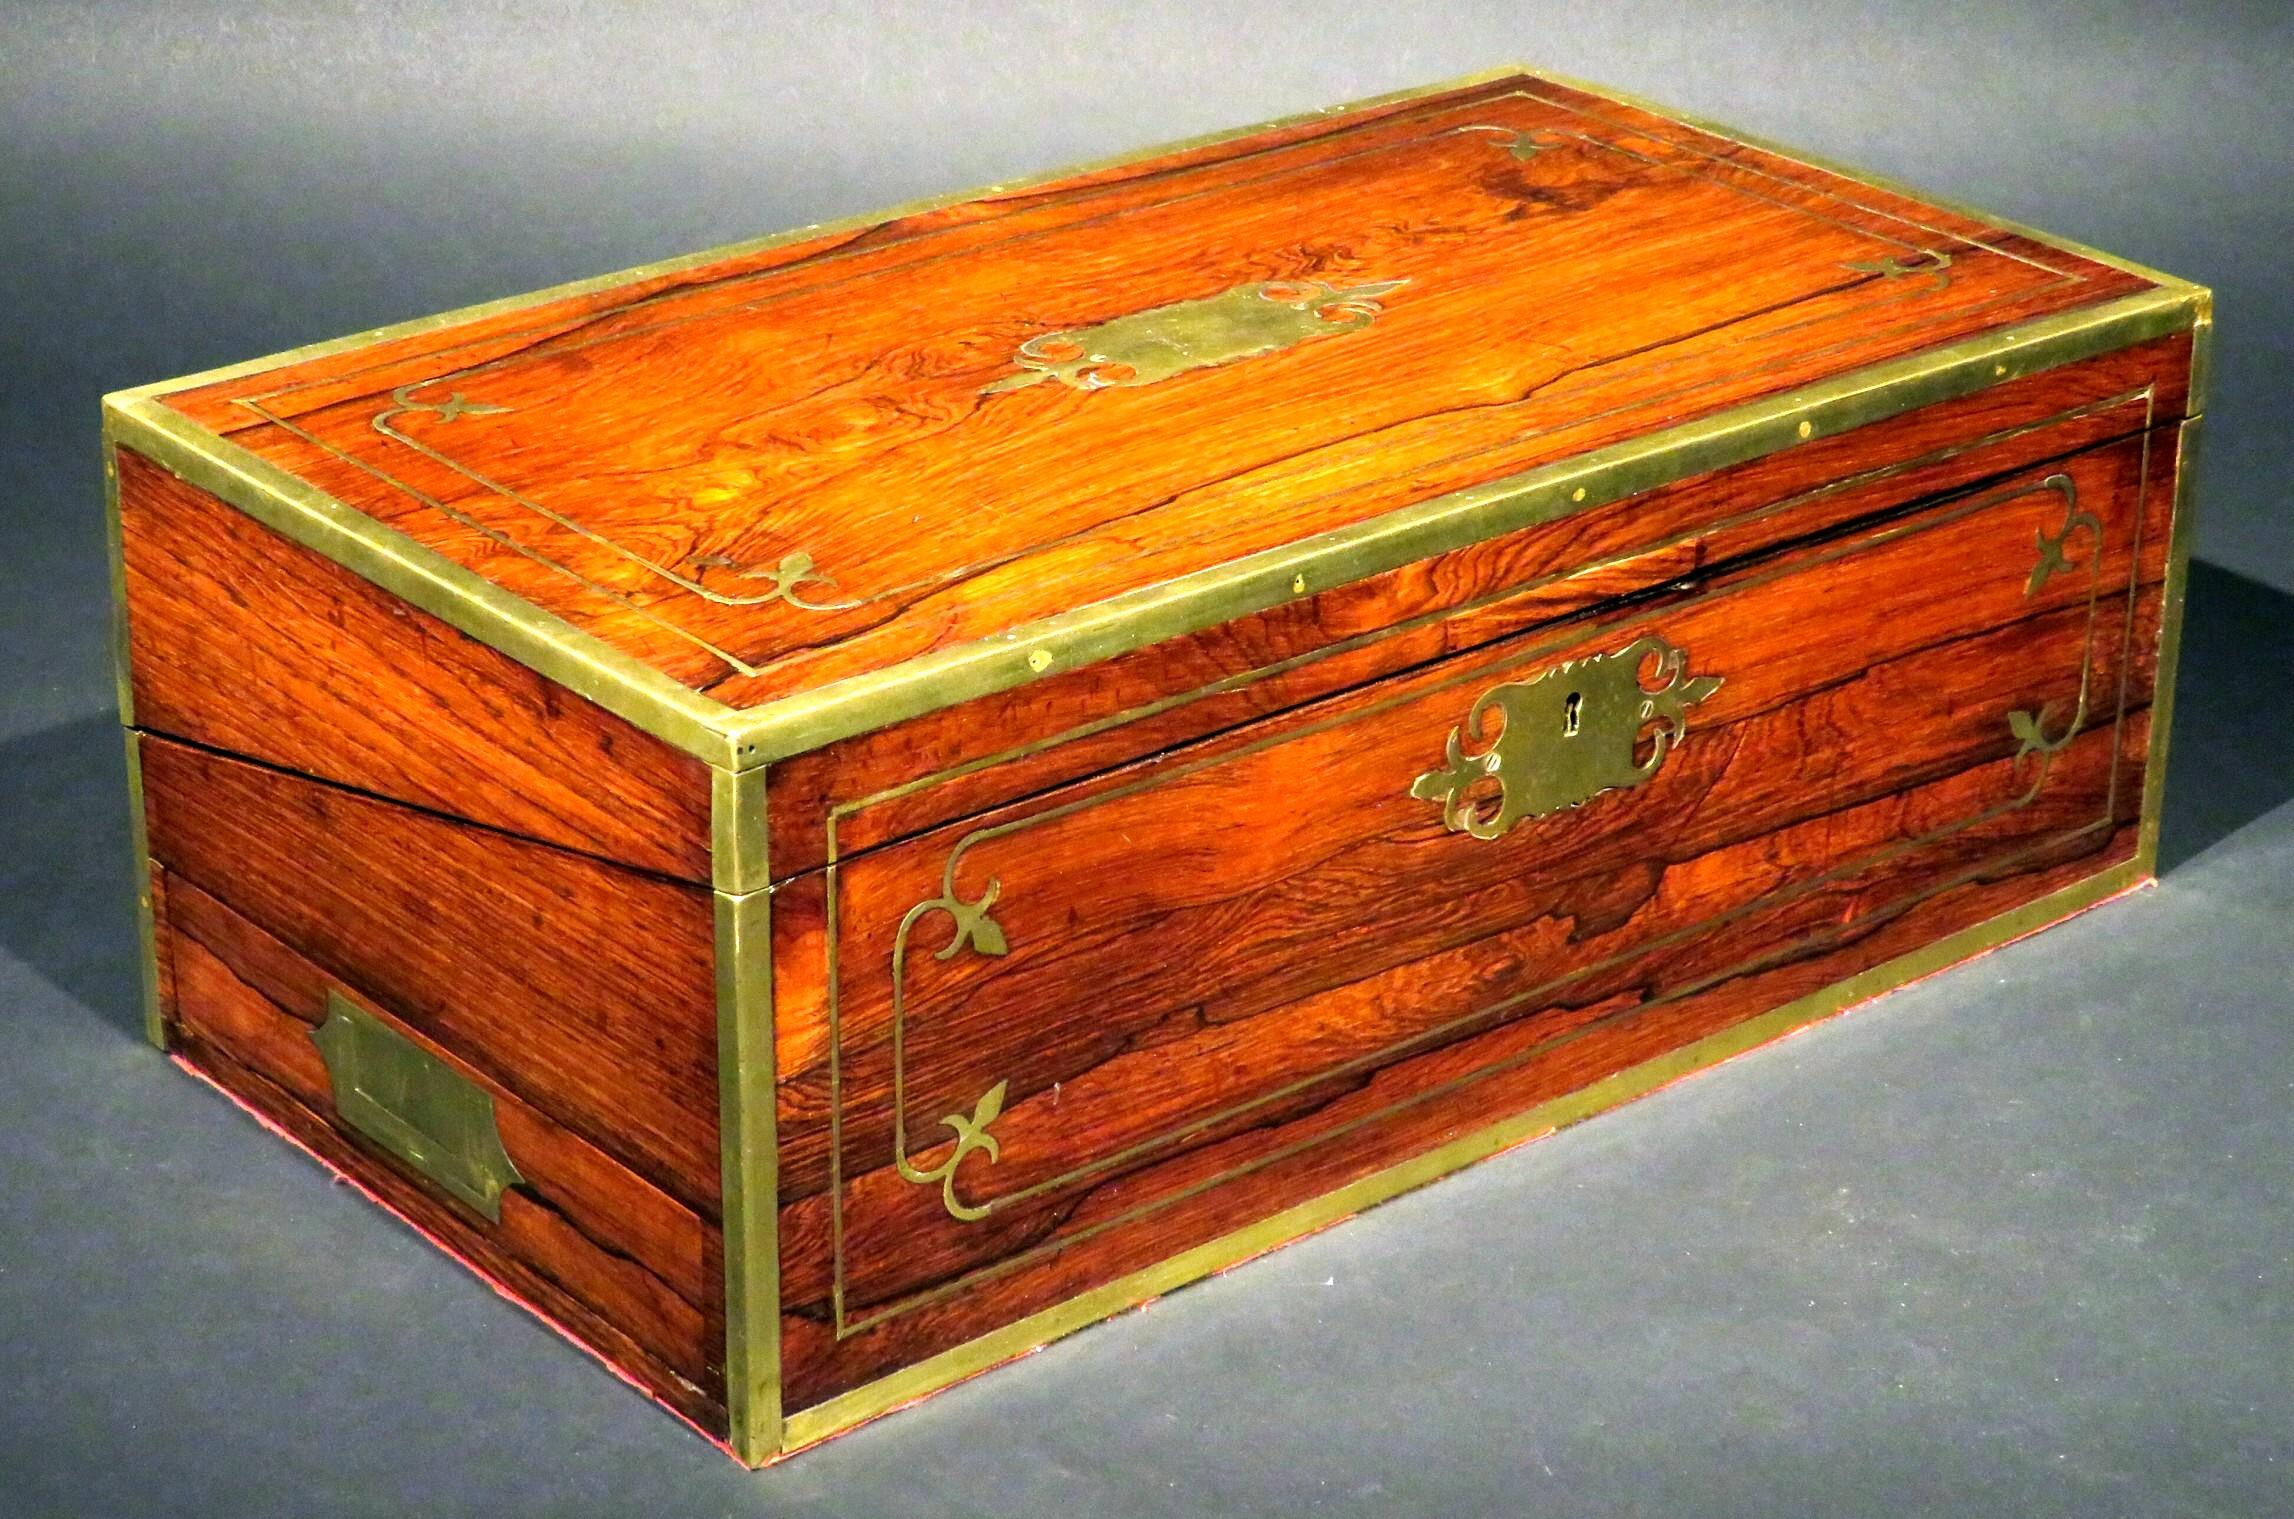 A superior Regency period brass bound writing box constructed of richly figured Brazilian rosewood, the hinged top inset with a blank brass cartouche and opening to an interior fitted for inkwells & writing implements, including two replace